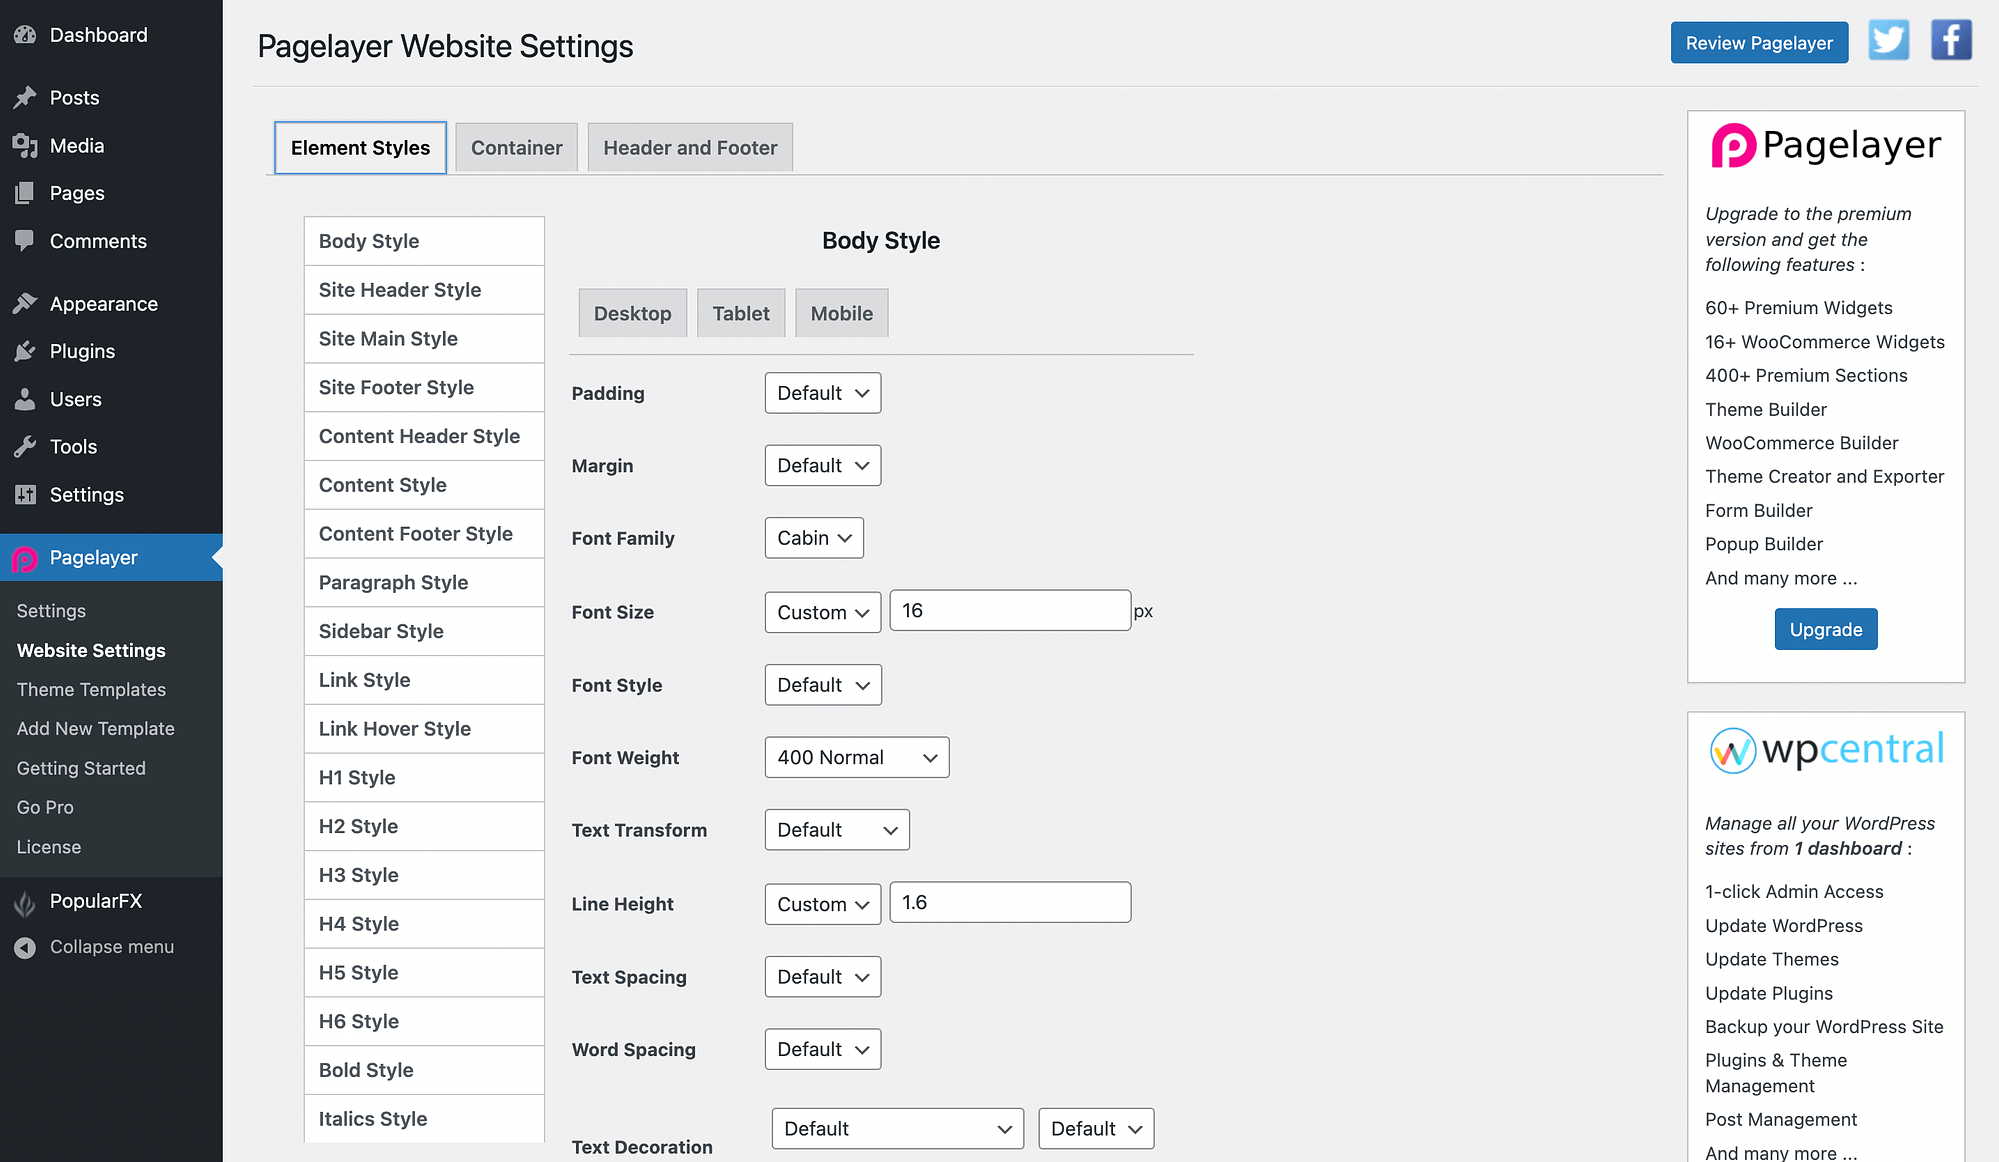 Pagelayer website settings.